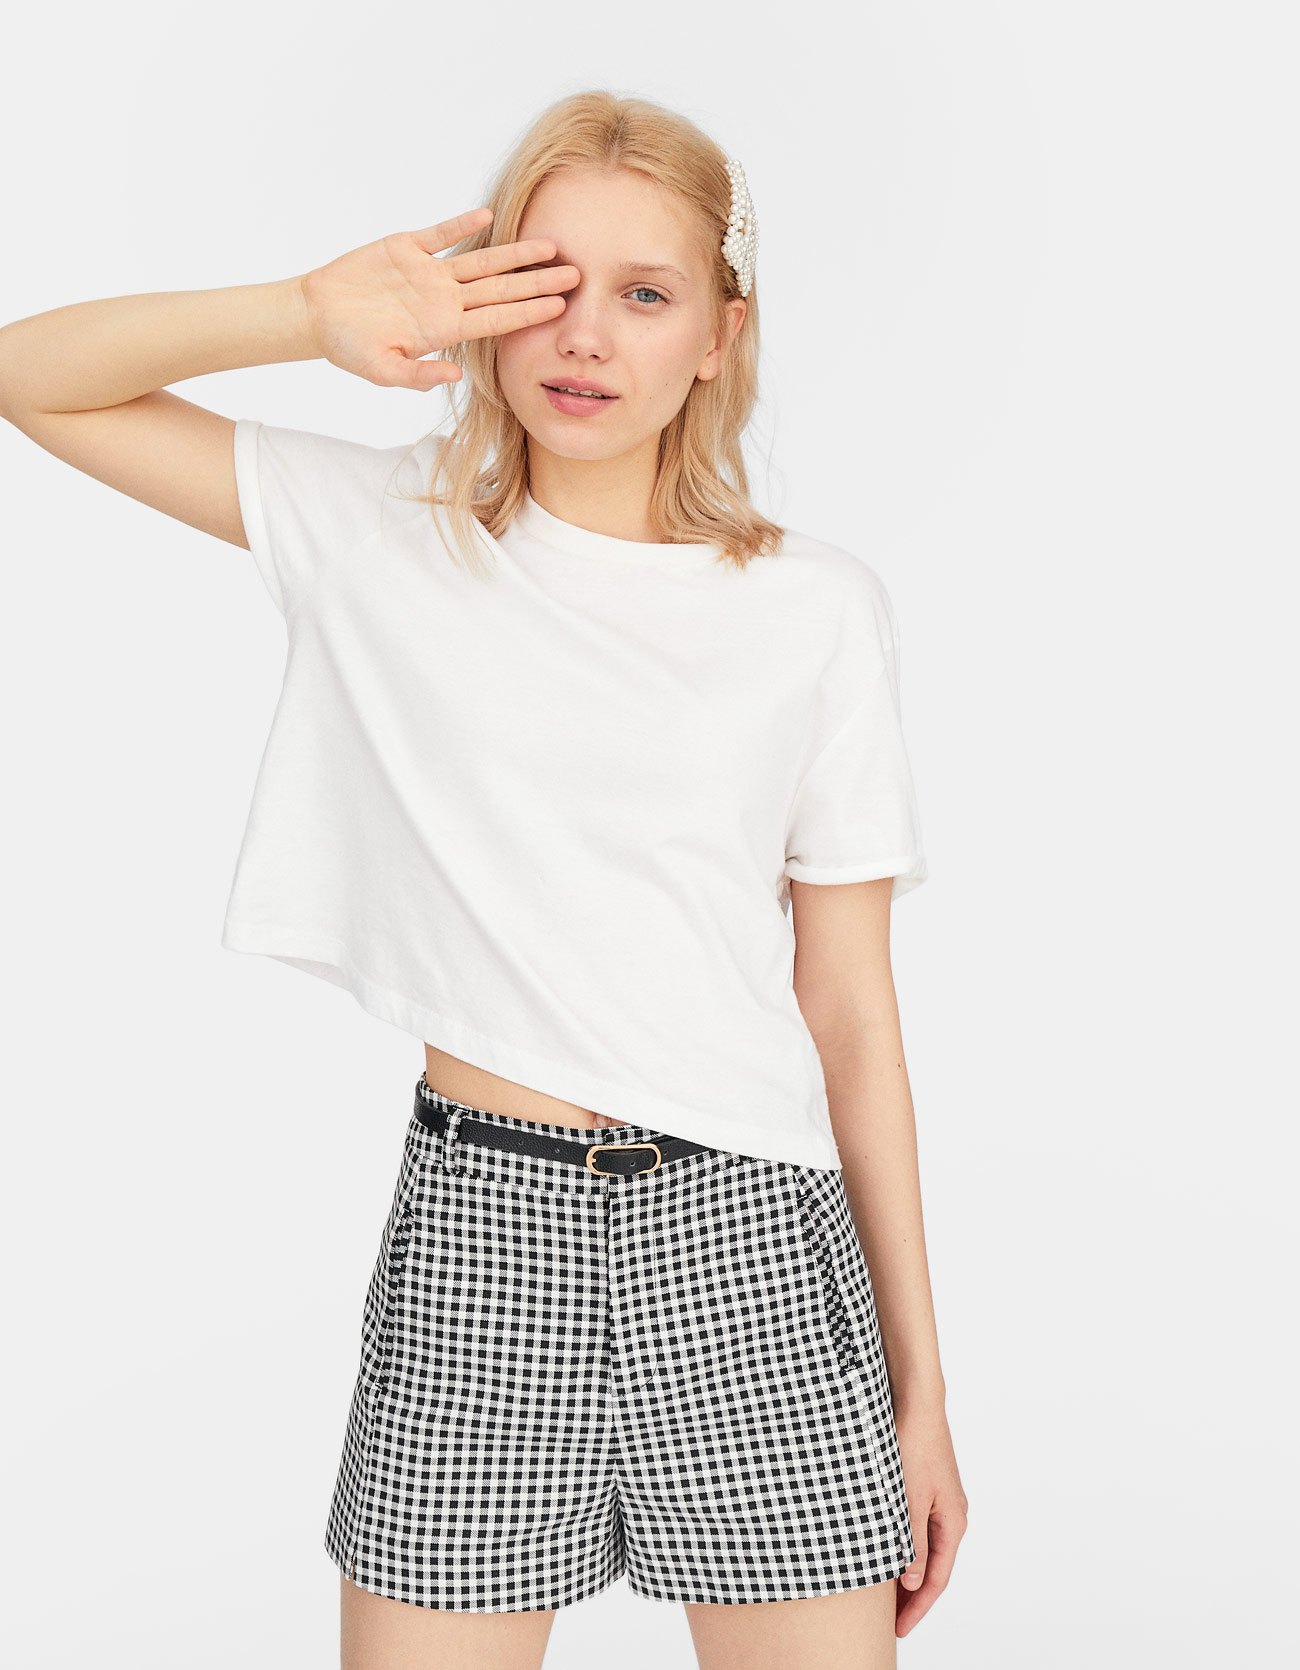 Stradivarius Cropped T-shirt at £5.99 | love the brands